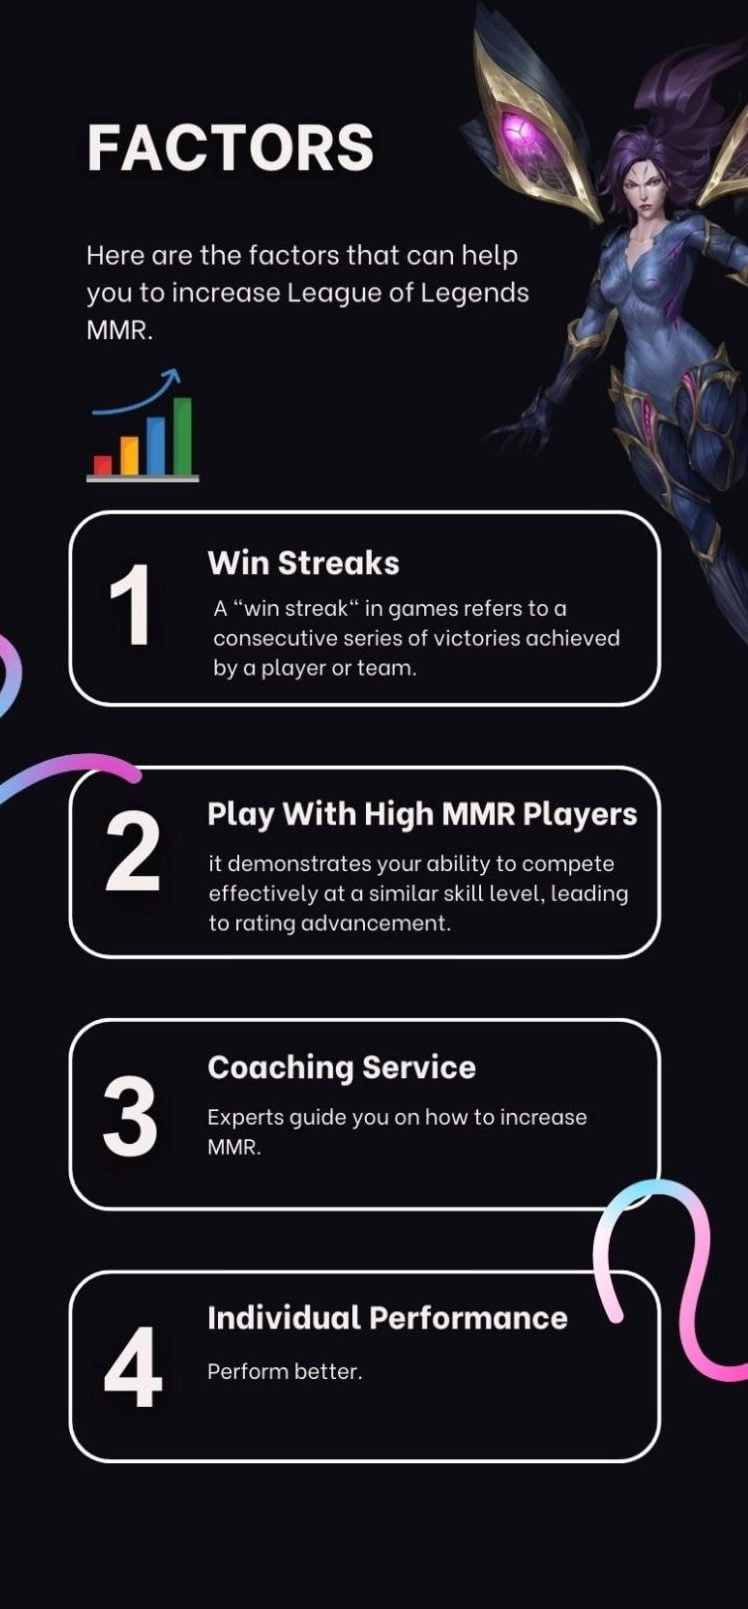 An infographic contain factors which can help the players to increase MMR.